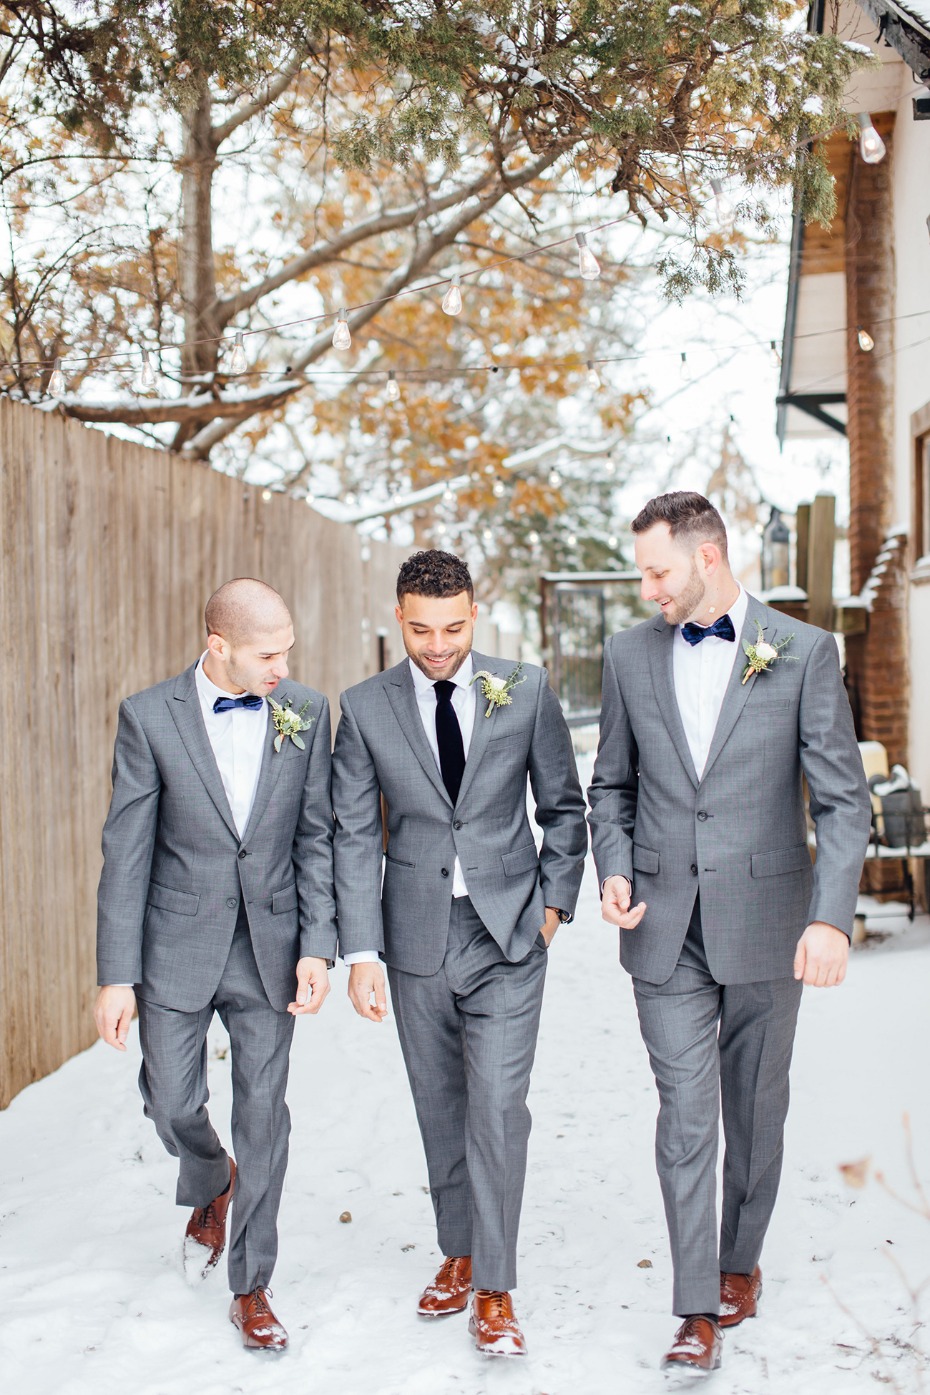 Grey suits and black ties